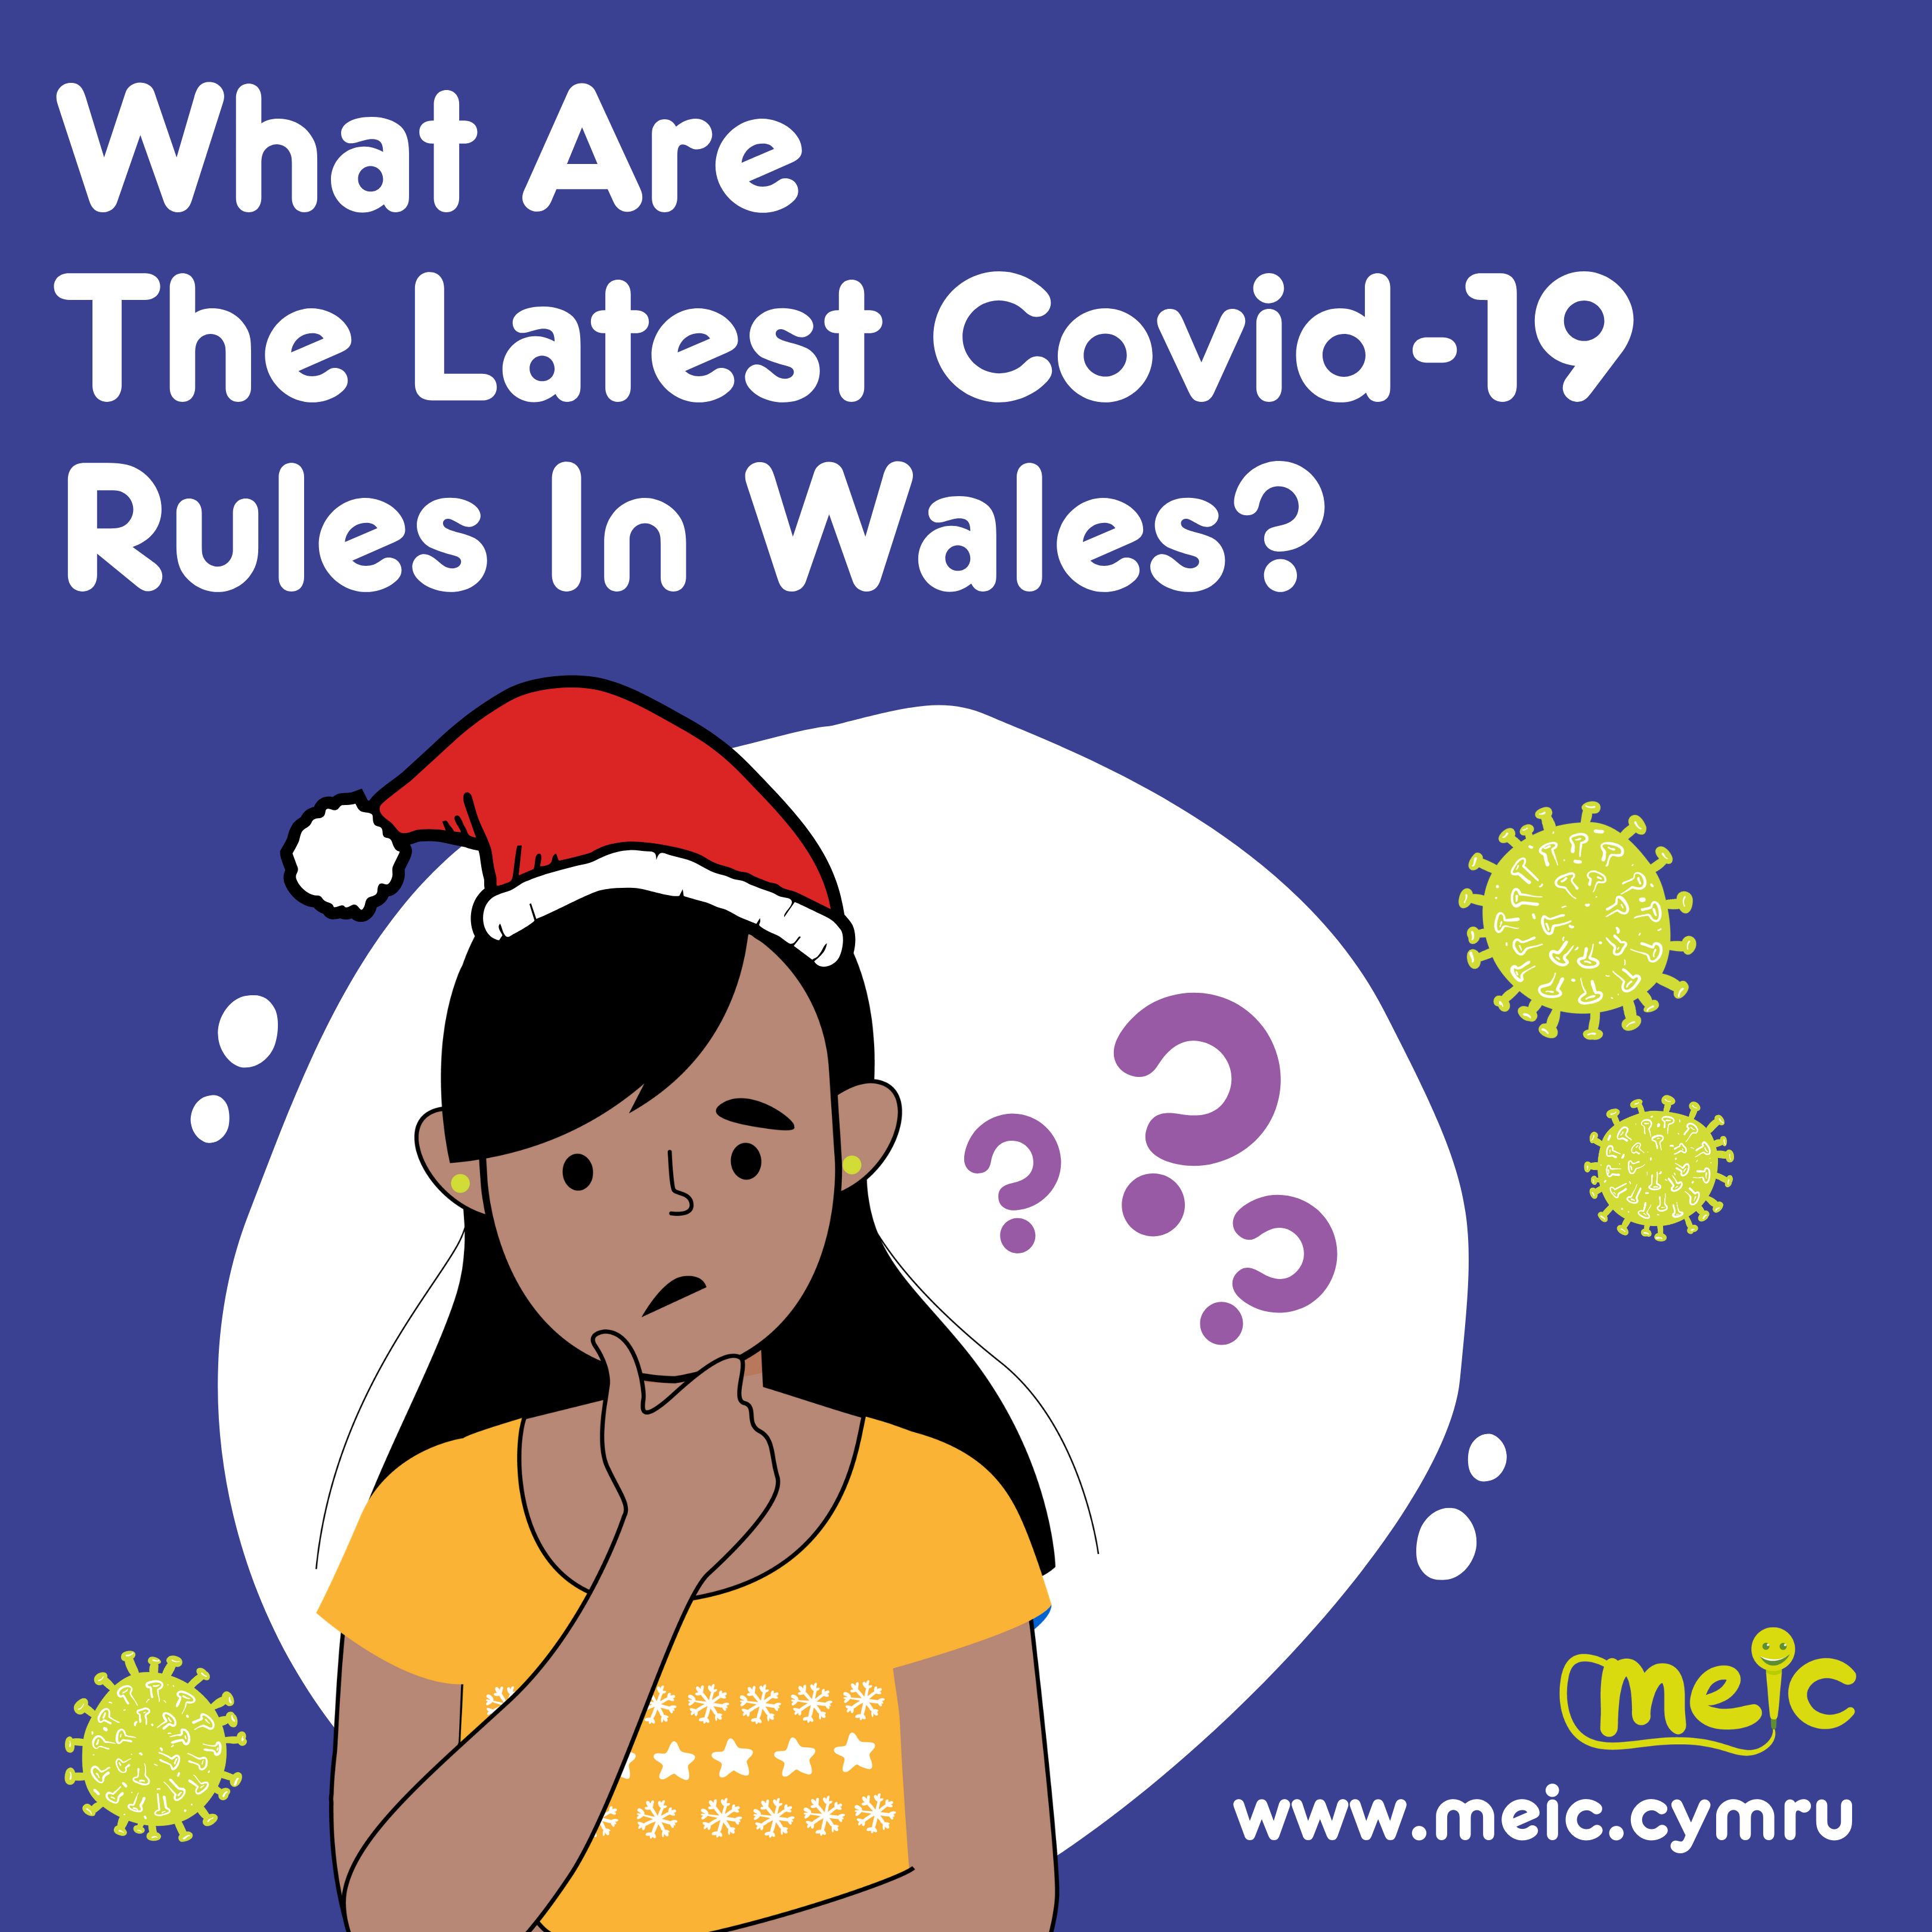 What Are The Latest Covid-19 Rules in Wales?